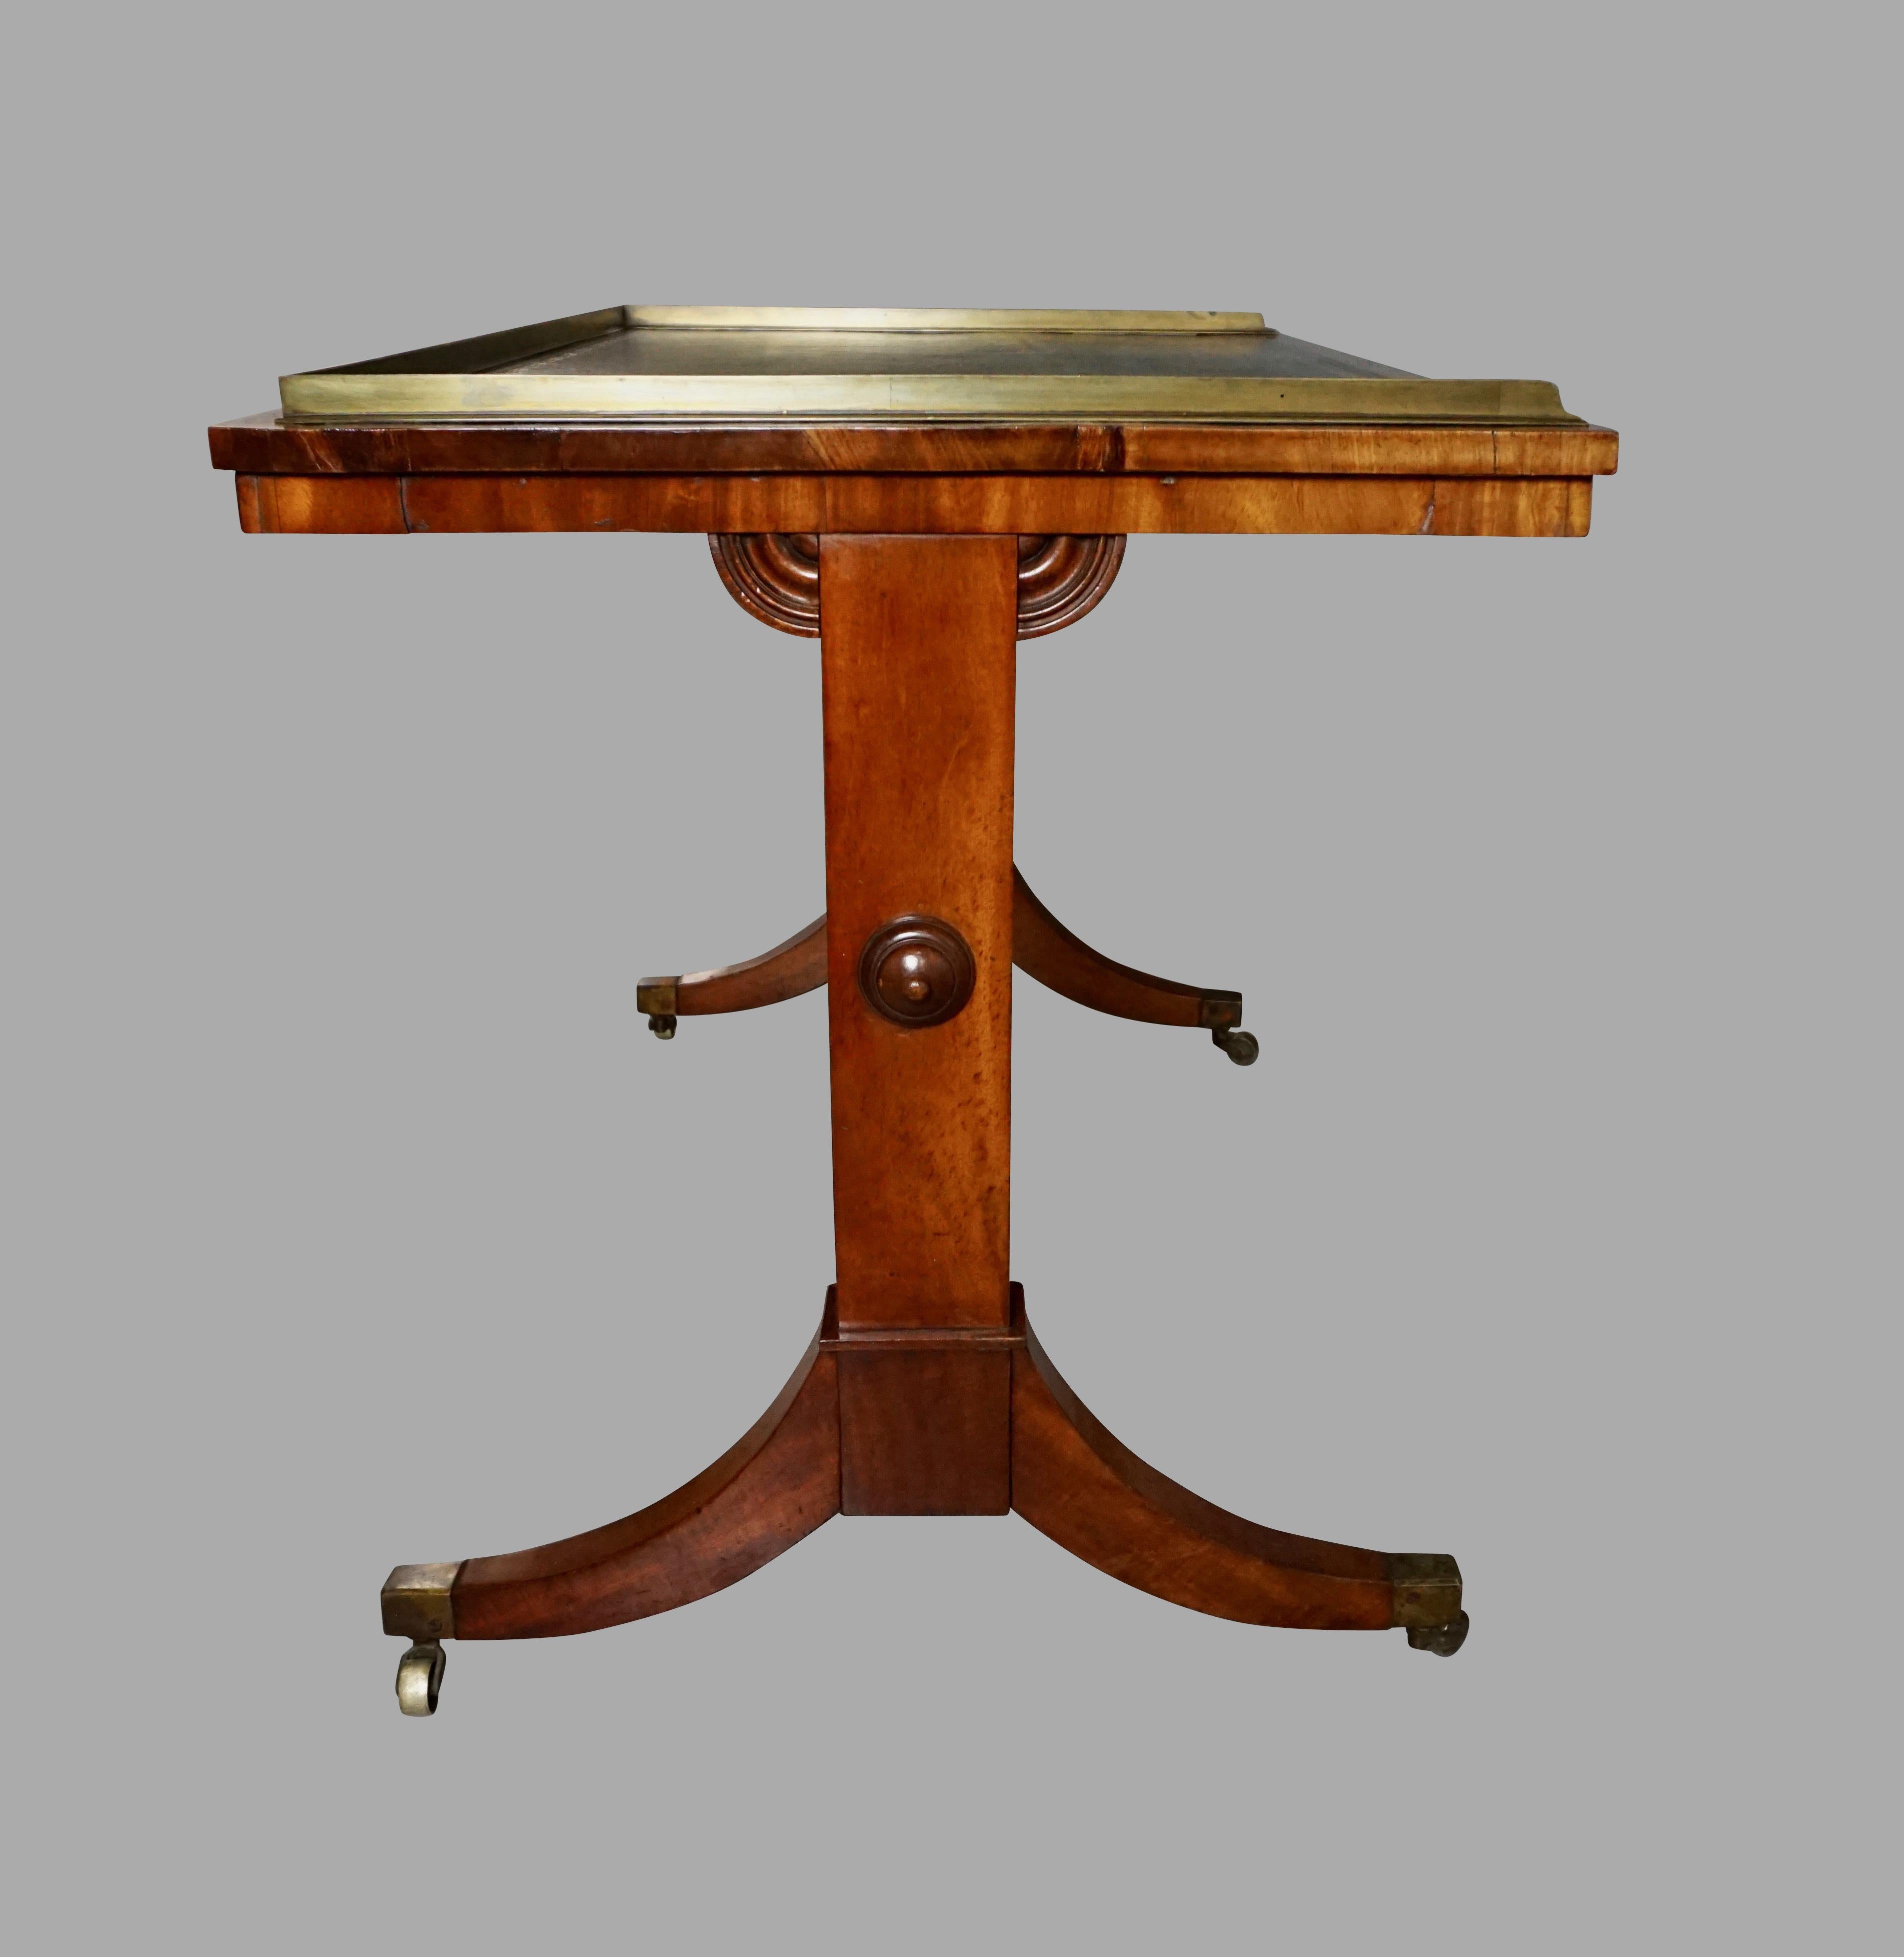 English Regency Period Writing Table with Brass Gallery and Tooled Leather Top 1